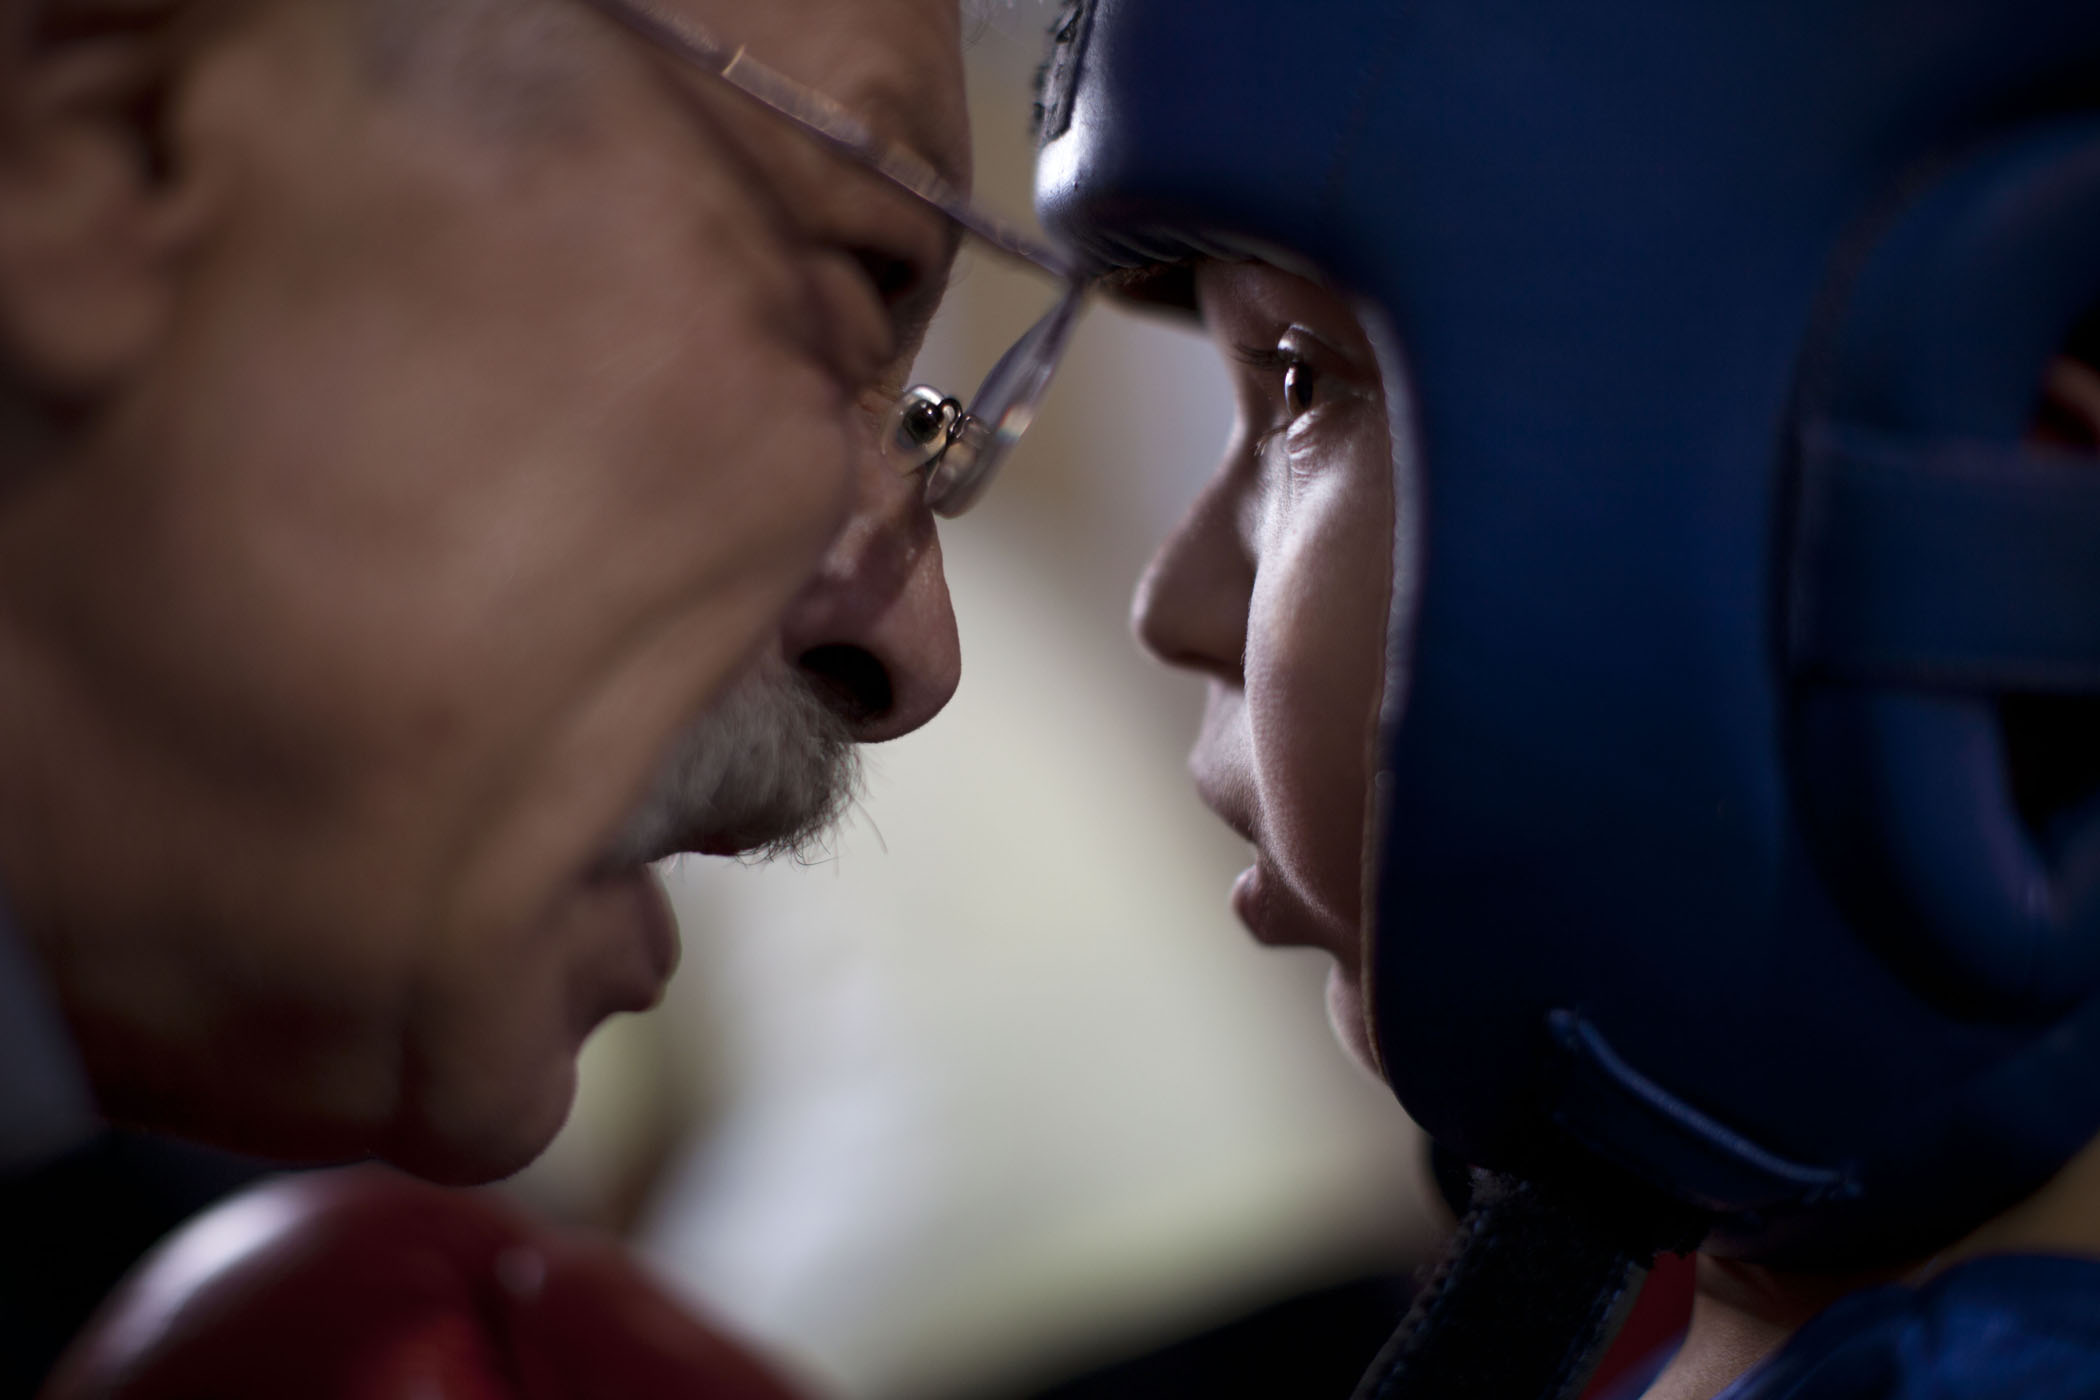 An Israeli coach talks to a young boxer before his fight during Israel's National Youth Boxing Championship in the Arab village of Kfar Yasif, northern Israel.